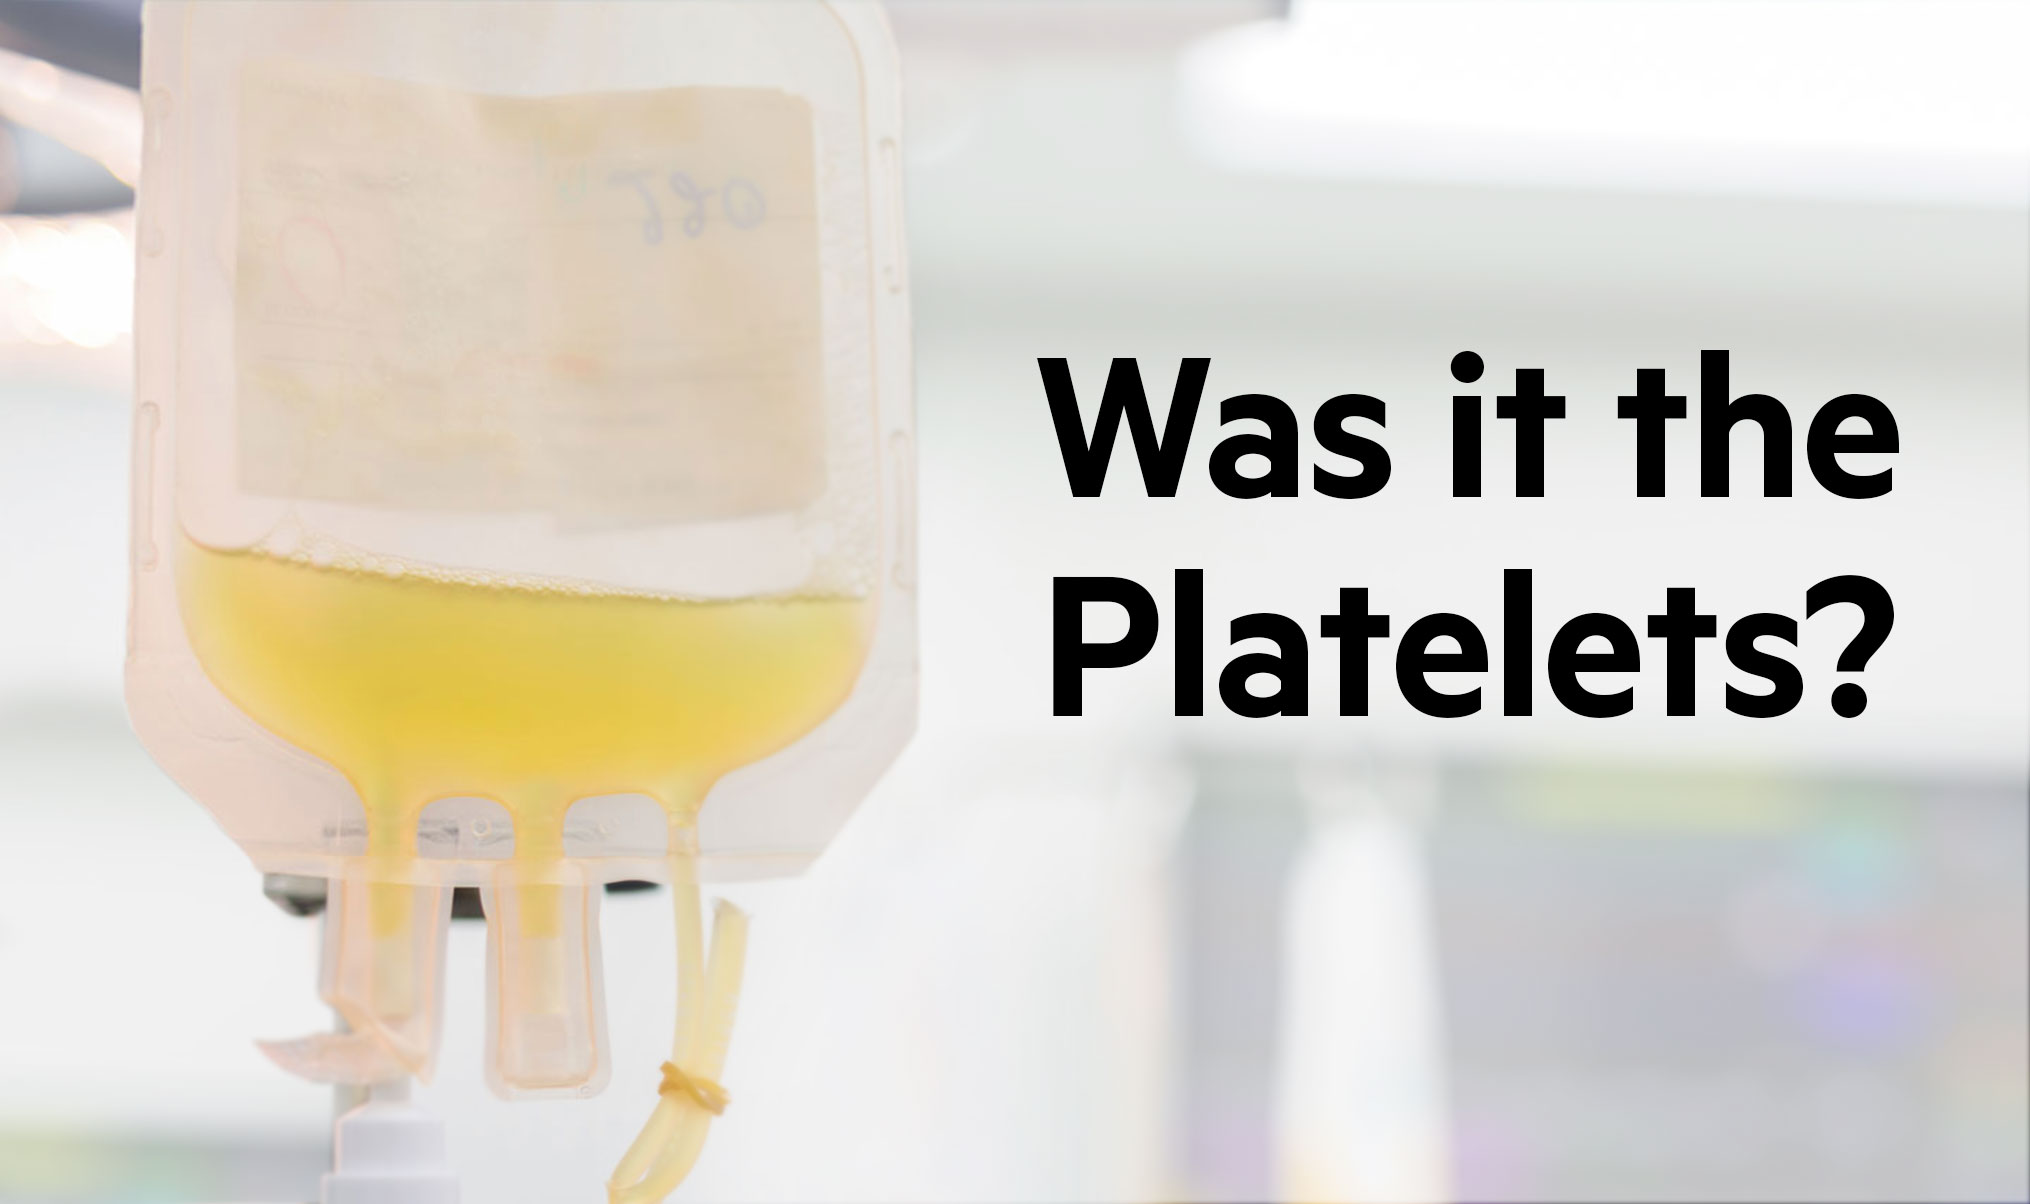 Was it the Platelets?